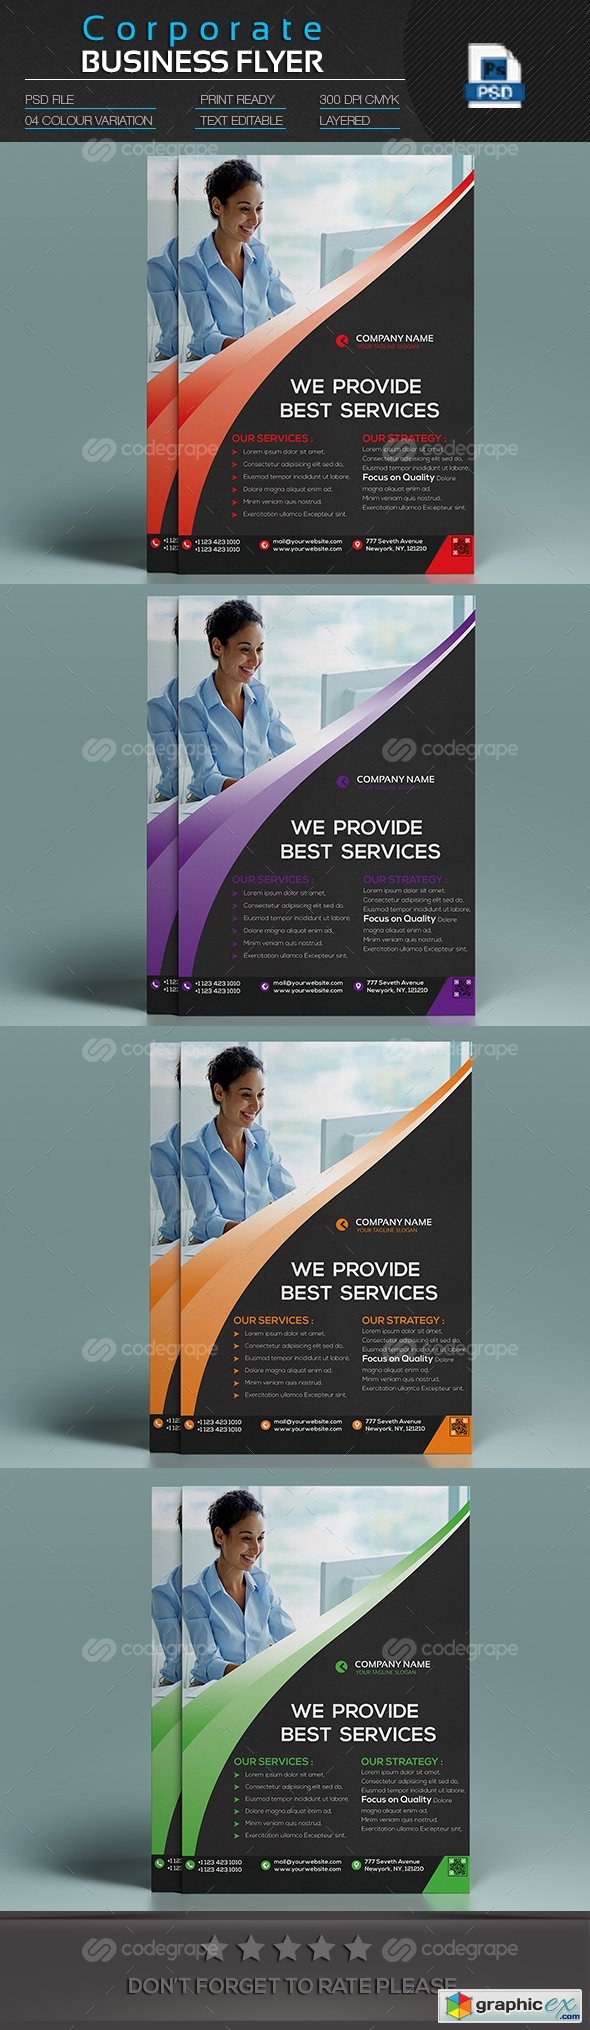 Corporate Business Flyer 9879